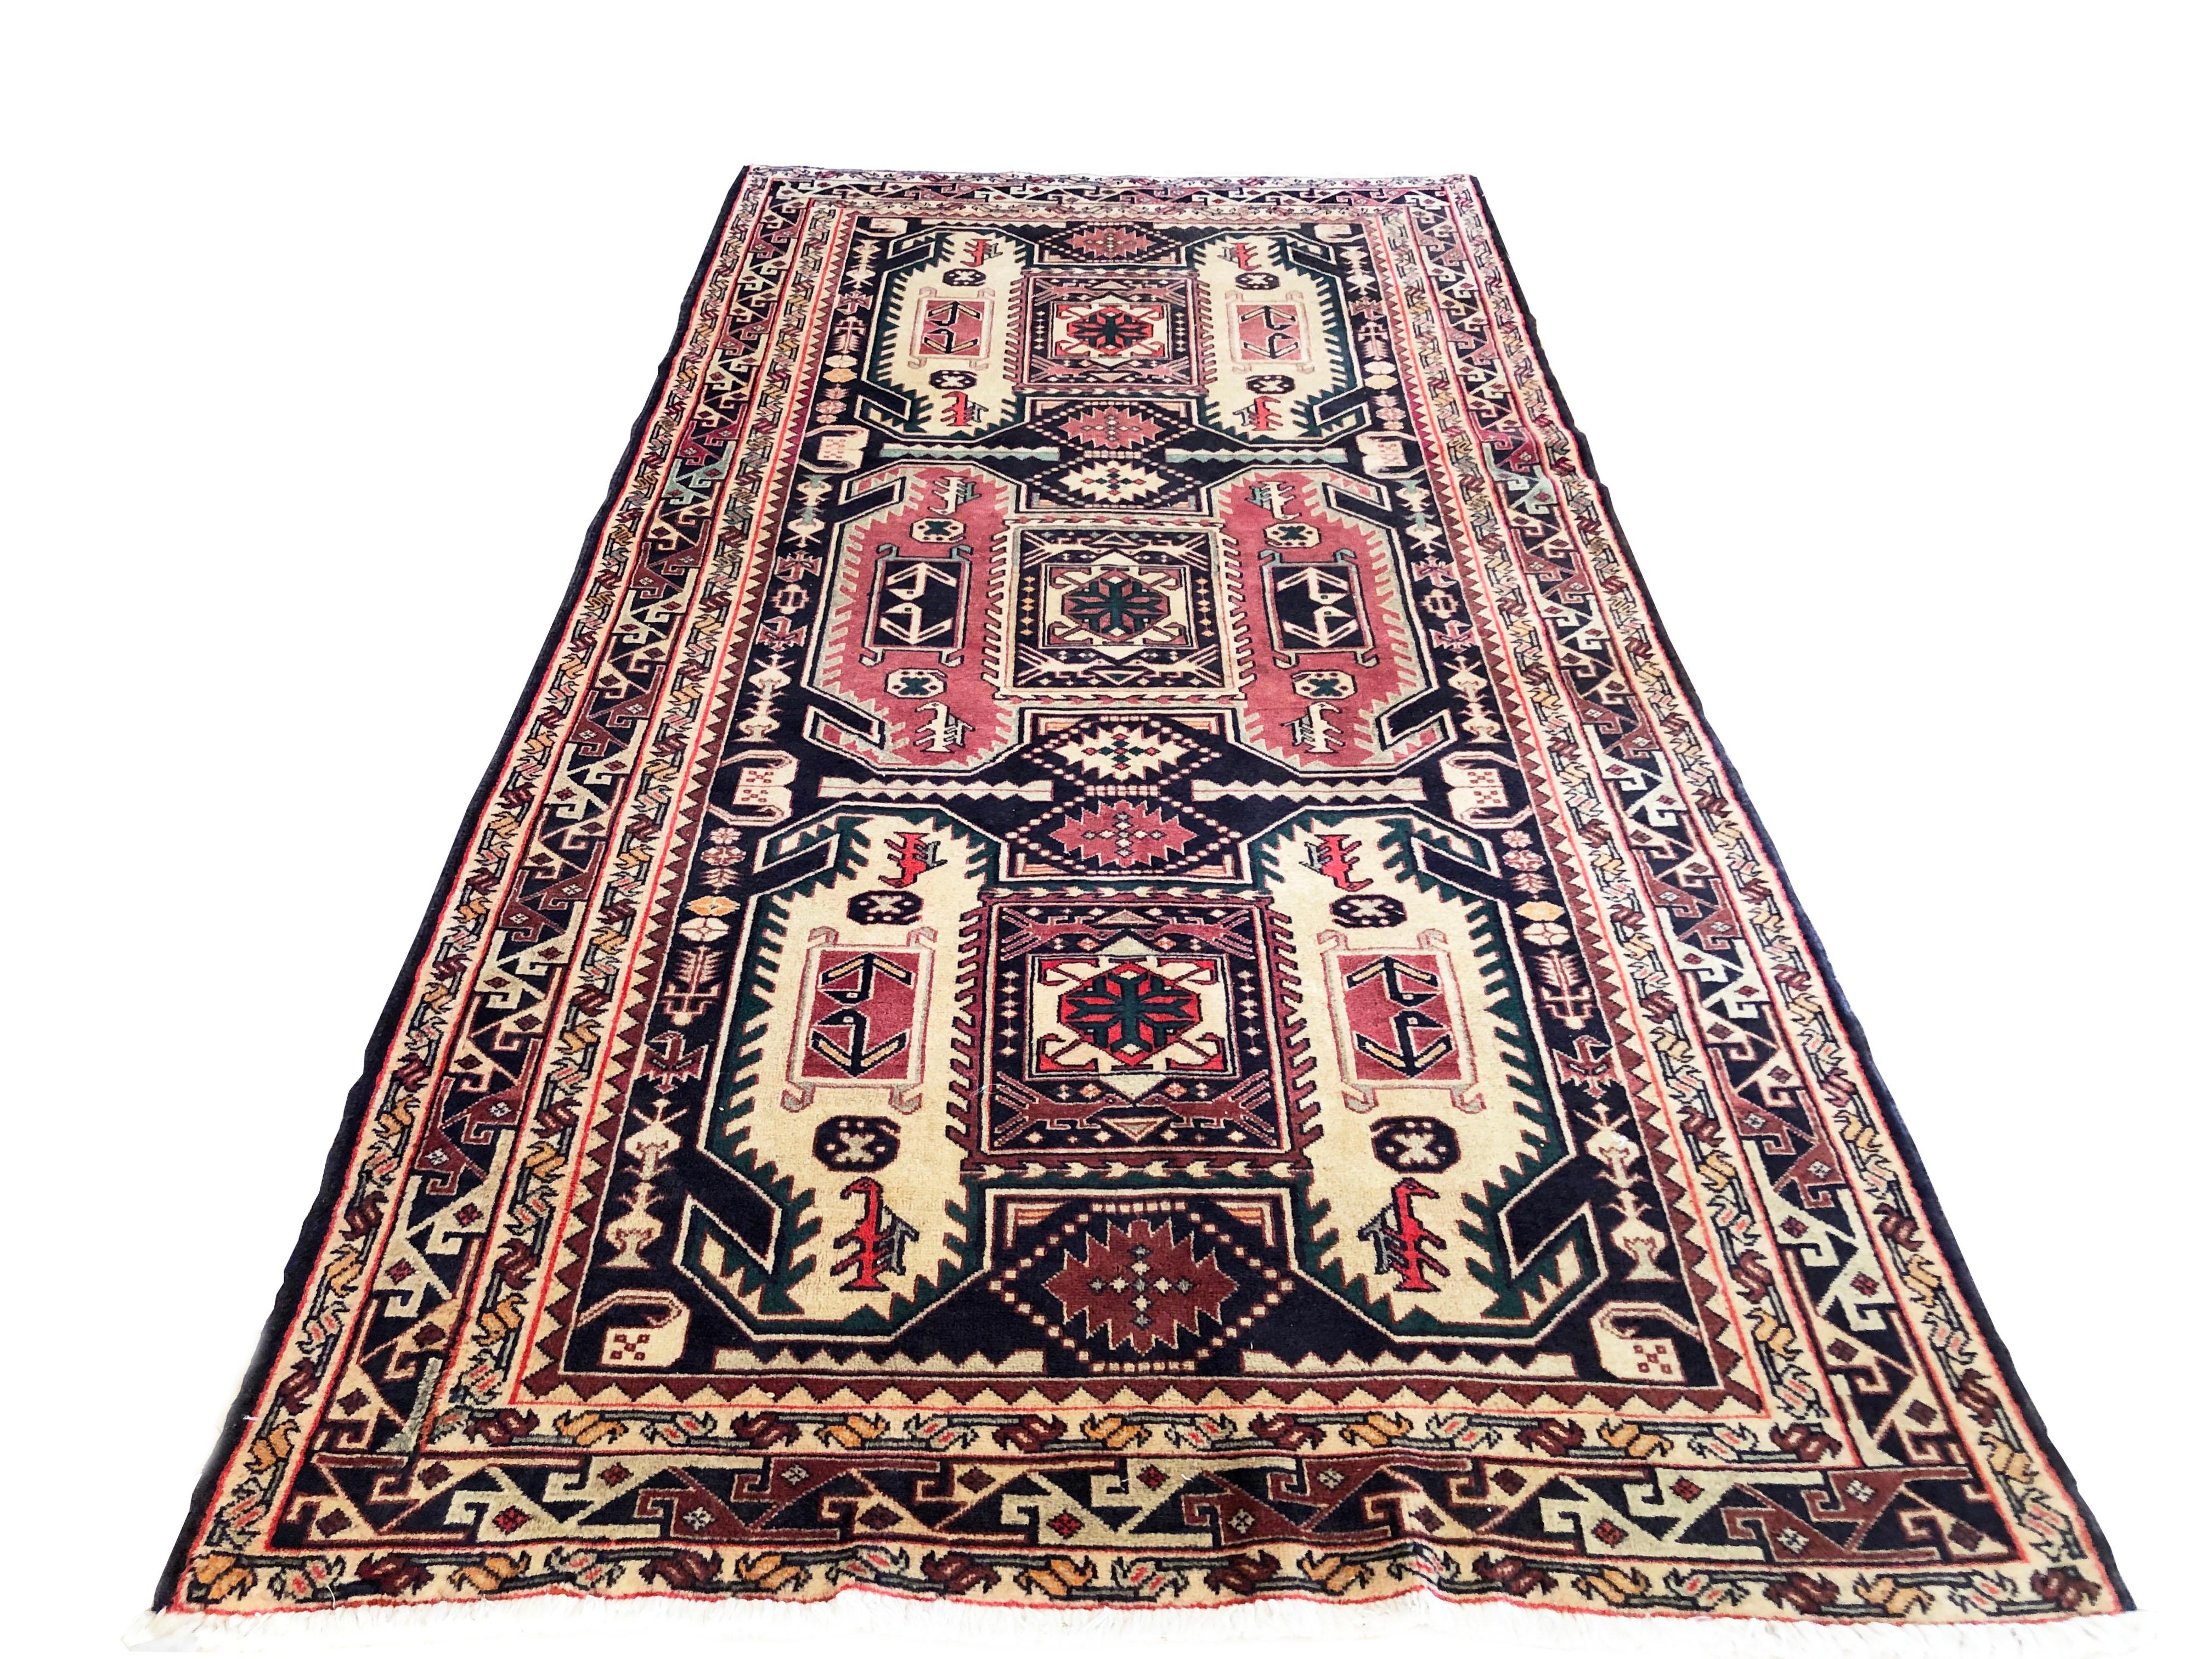 This rug is knotted in the province of Azarbayjan in north-west of Iran. The design is geometric with repeated medallion. The base color and border color is dark blue. The pile is wool with cotton foundation. The size is 5 feet wide by 9 feet 10